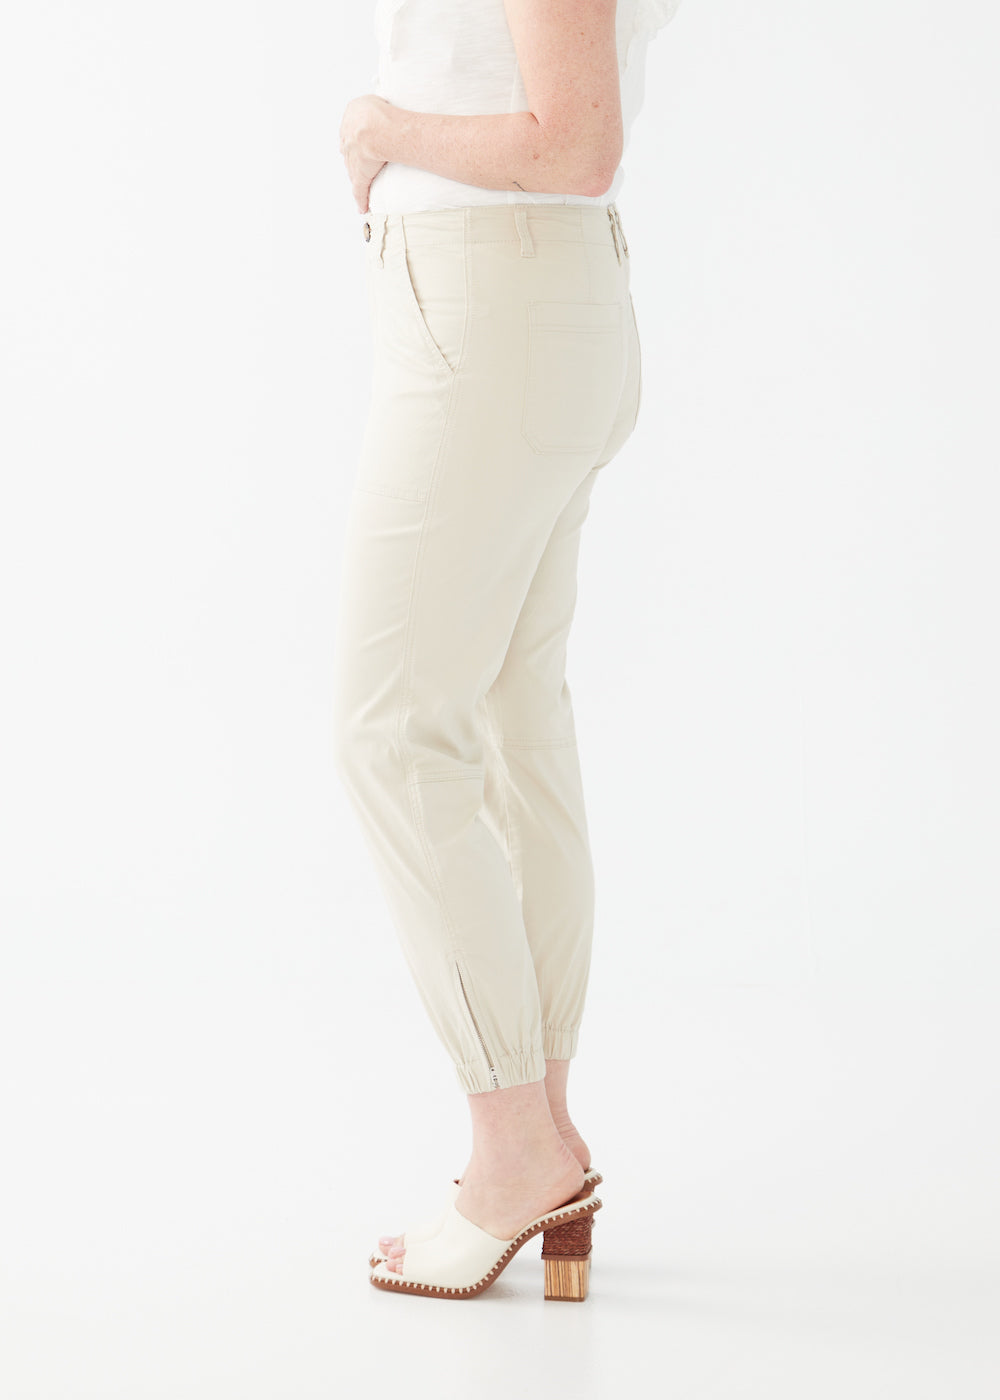 FDJ Olivia Slim Utility Pant - Oyster Clothing - Bottoms - Pants - Casual by French Dressing Jeans | Grace the Boutique